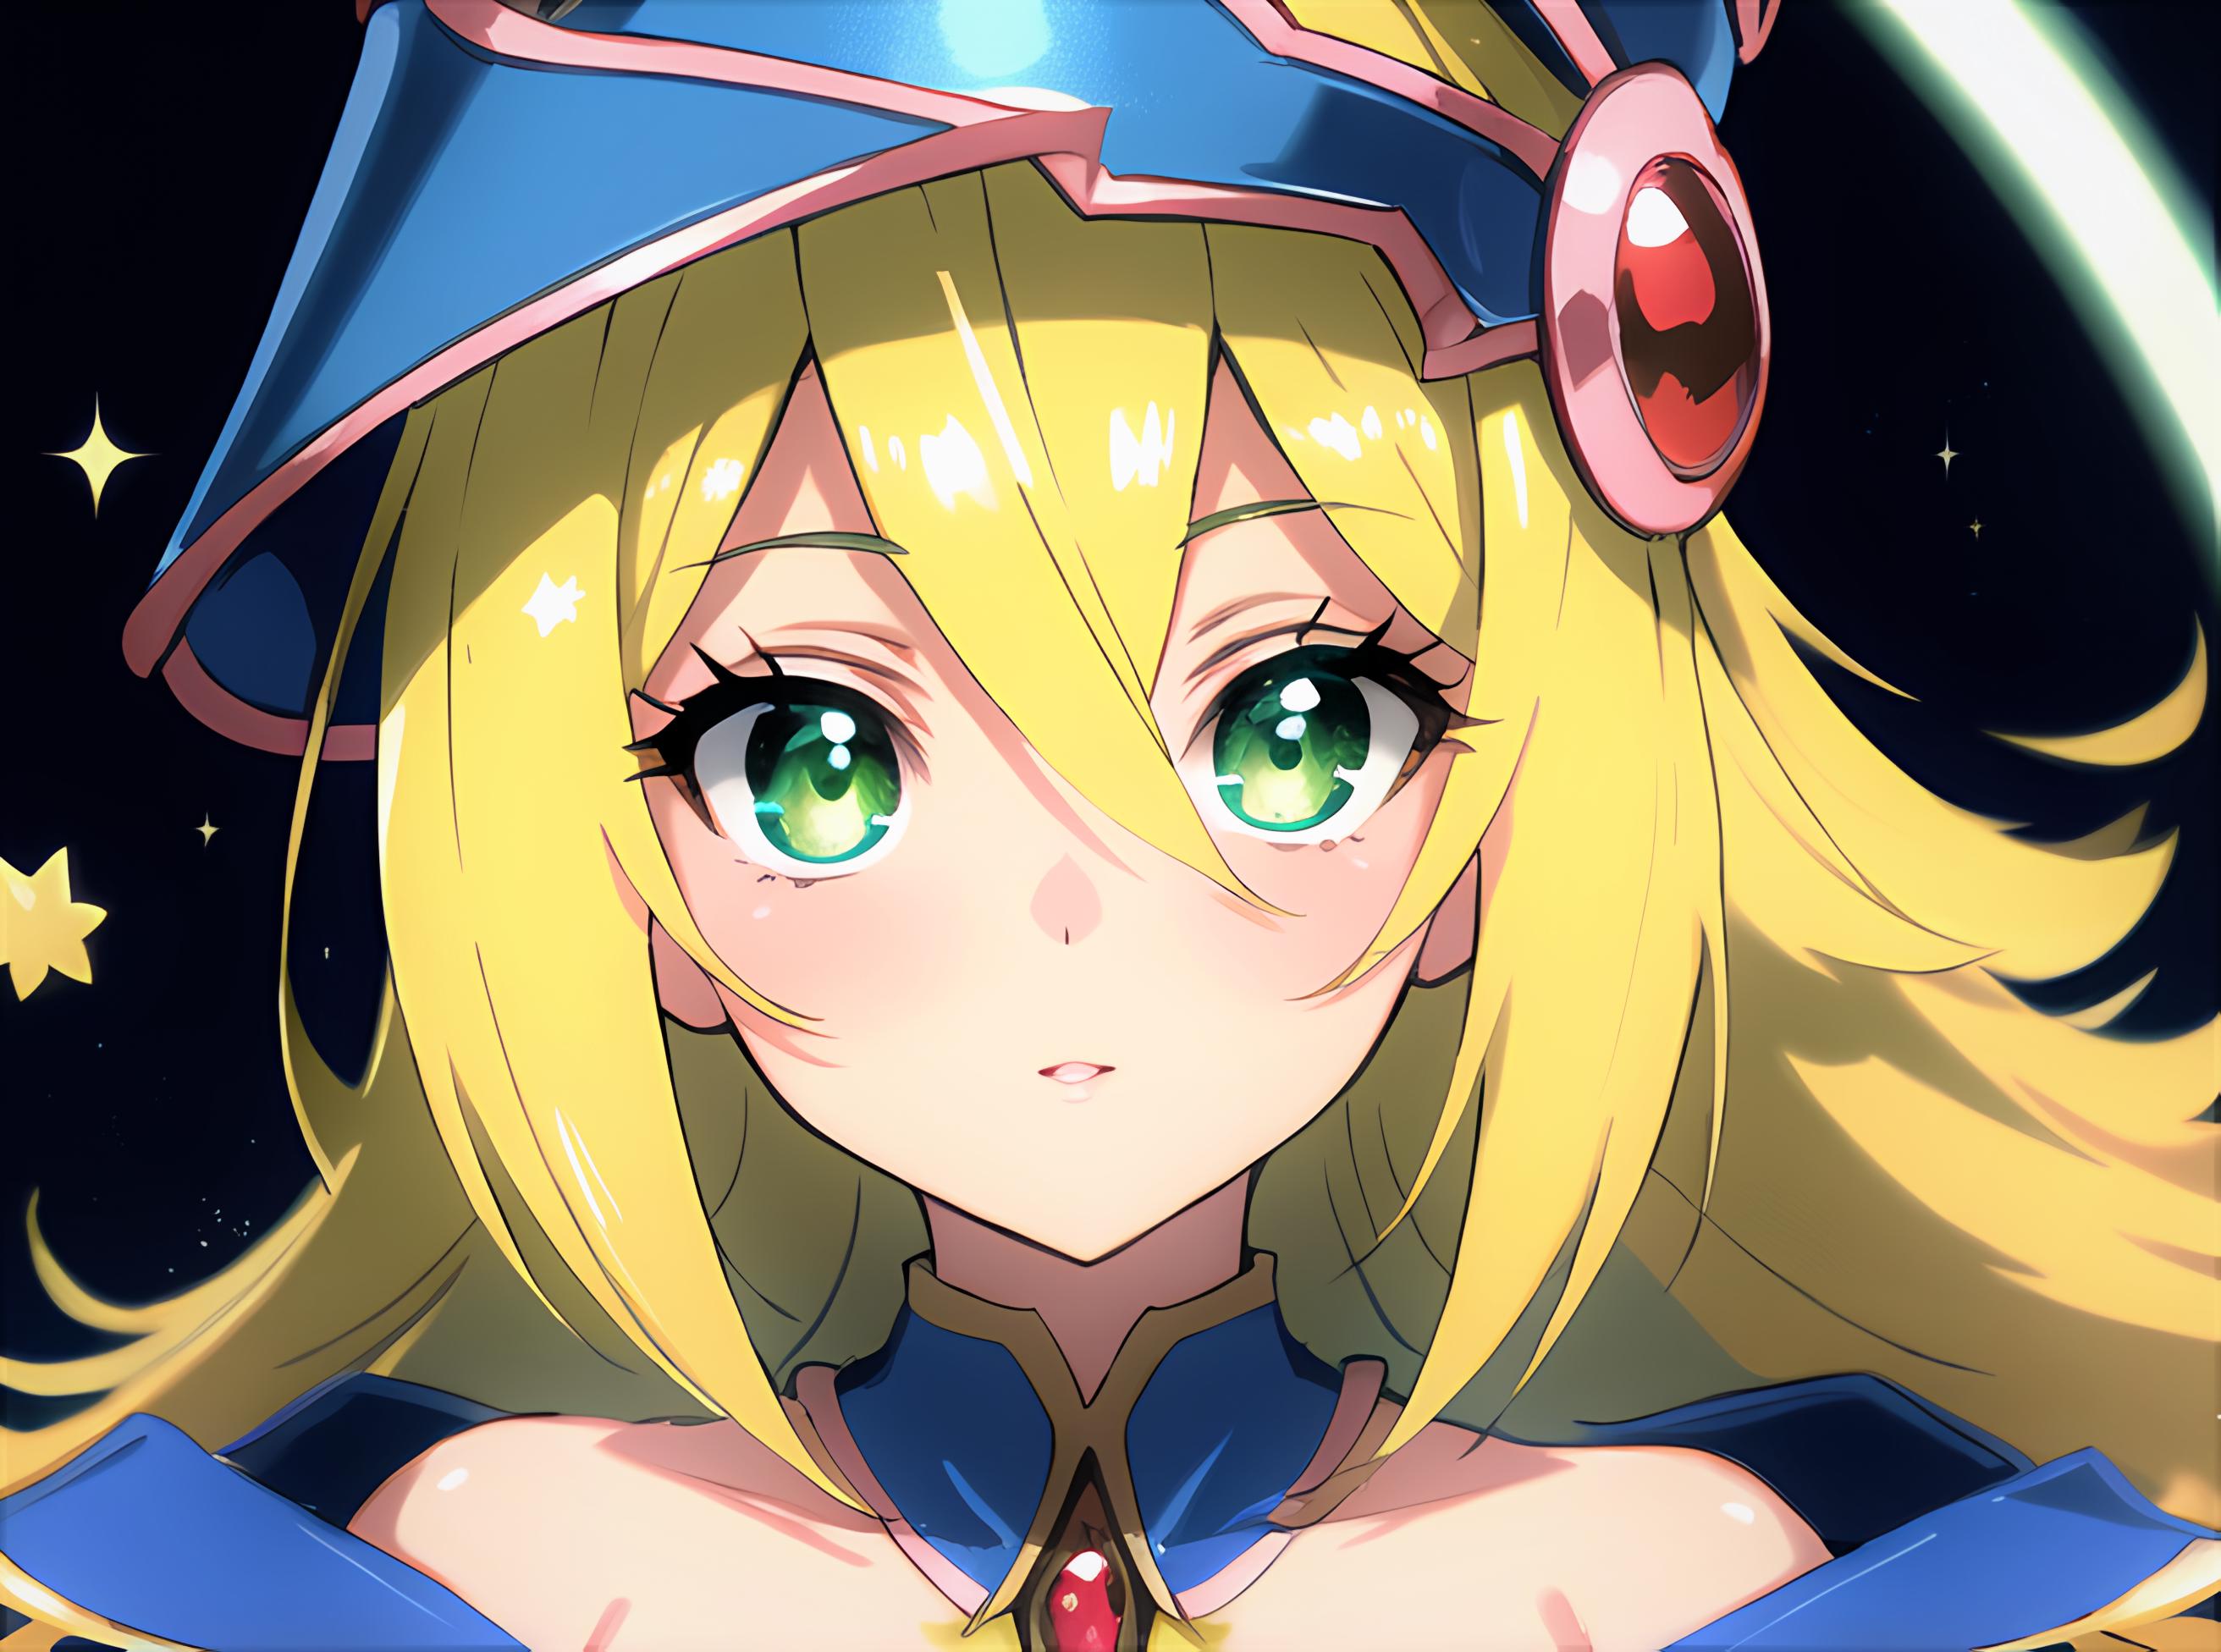 Dark Magician Girl LoRA image by tranquil6587